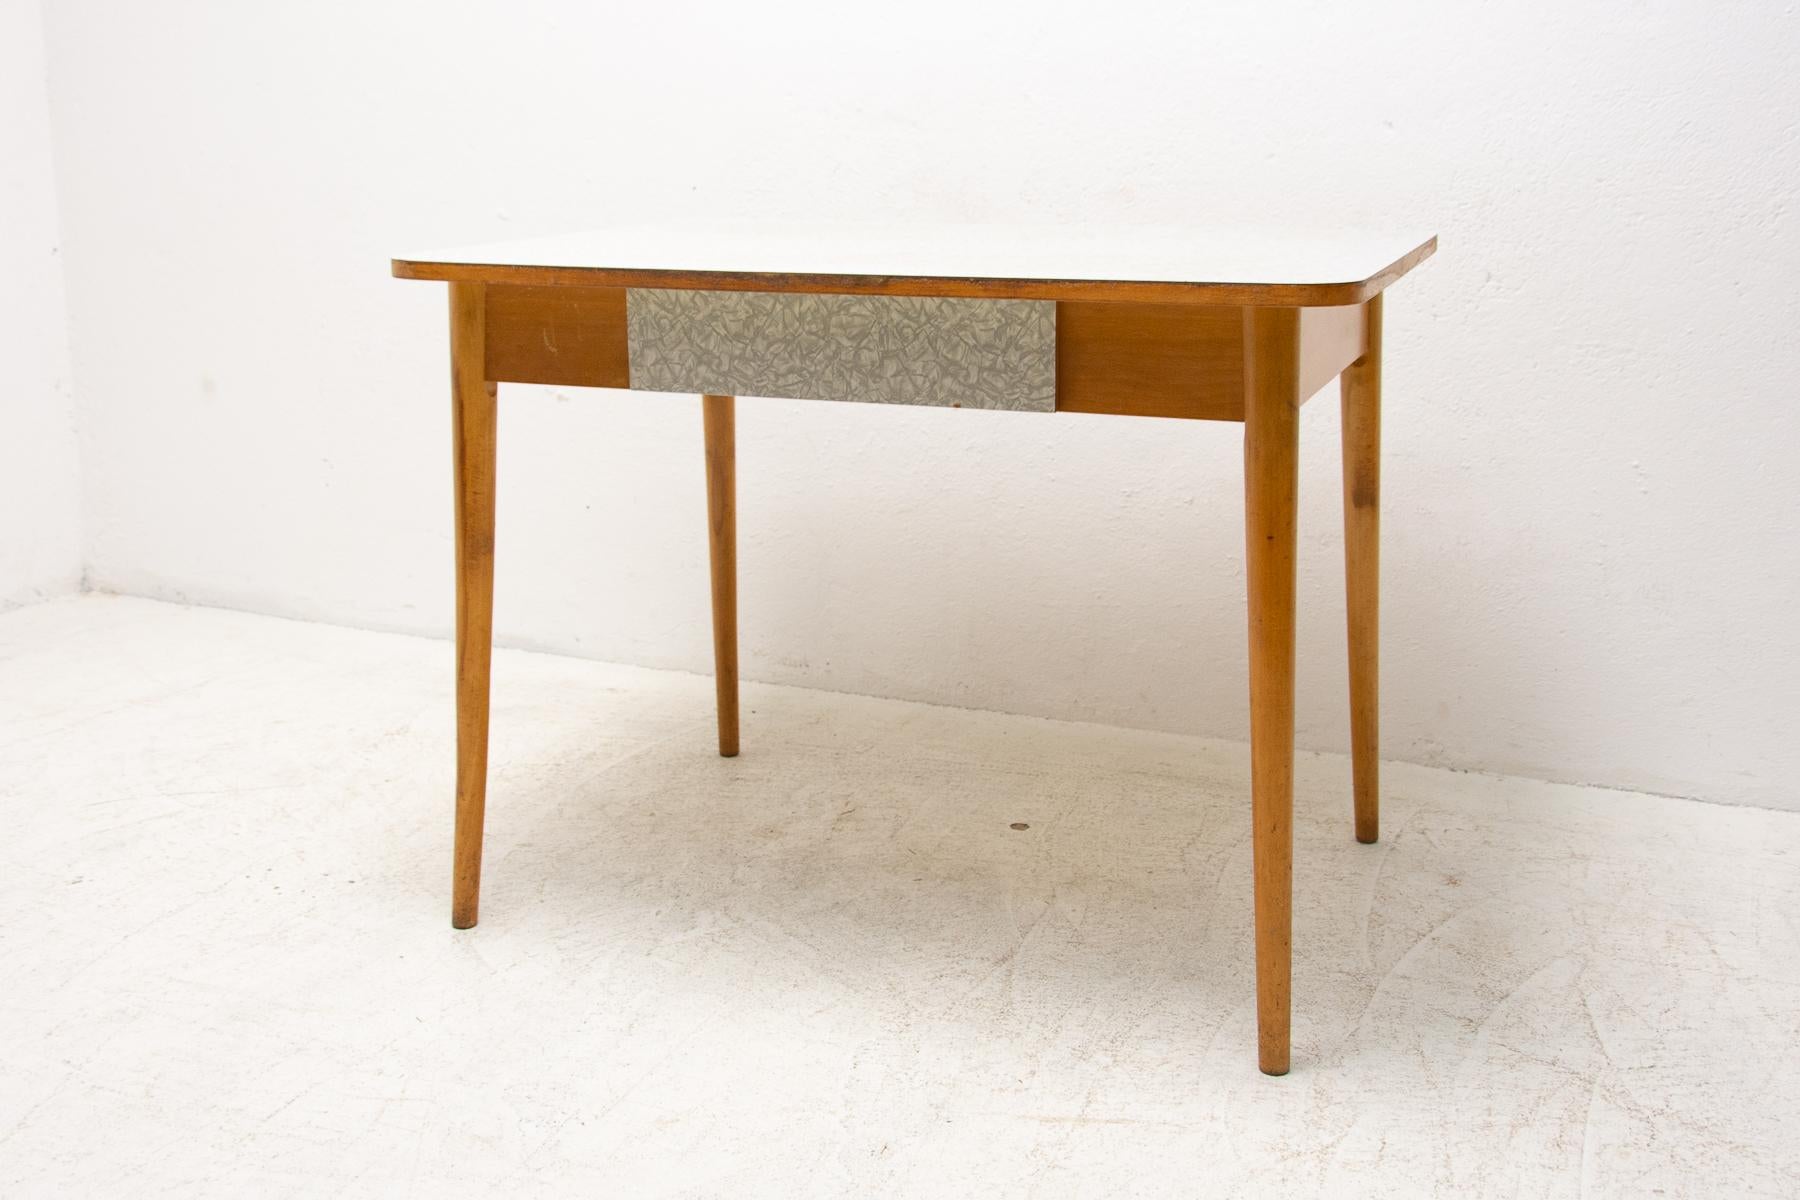 Mid-century central table with a formica plate, beech legs and one drawer. It can be used as a writing desk as well. It was made in the former Czechoslovakia in the 1960´s. In well preserved Vintage condition, shows signs of age and